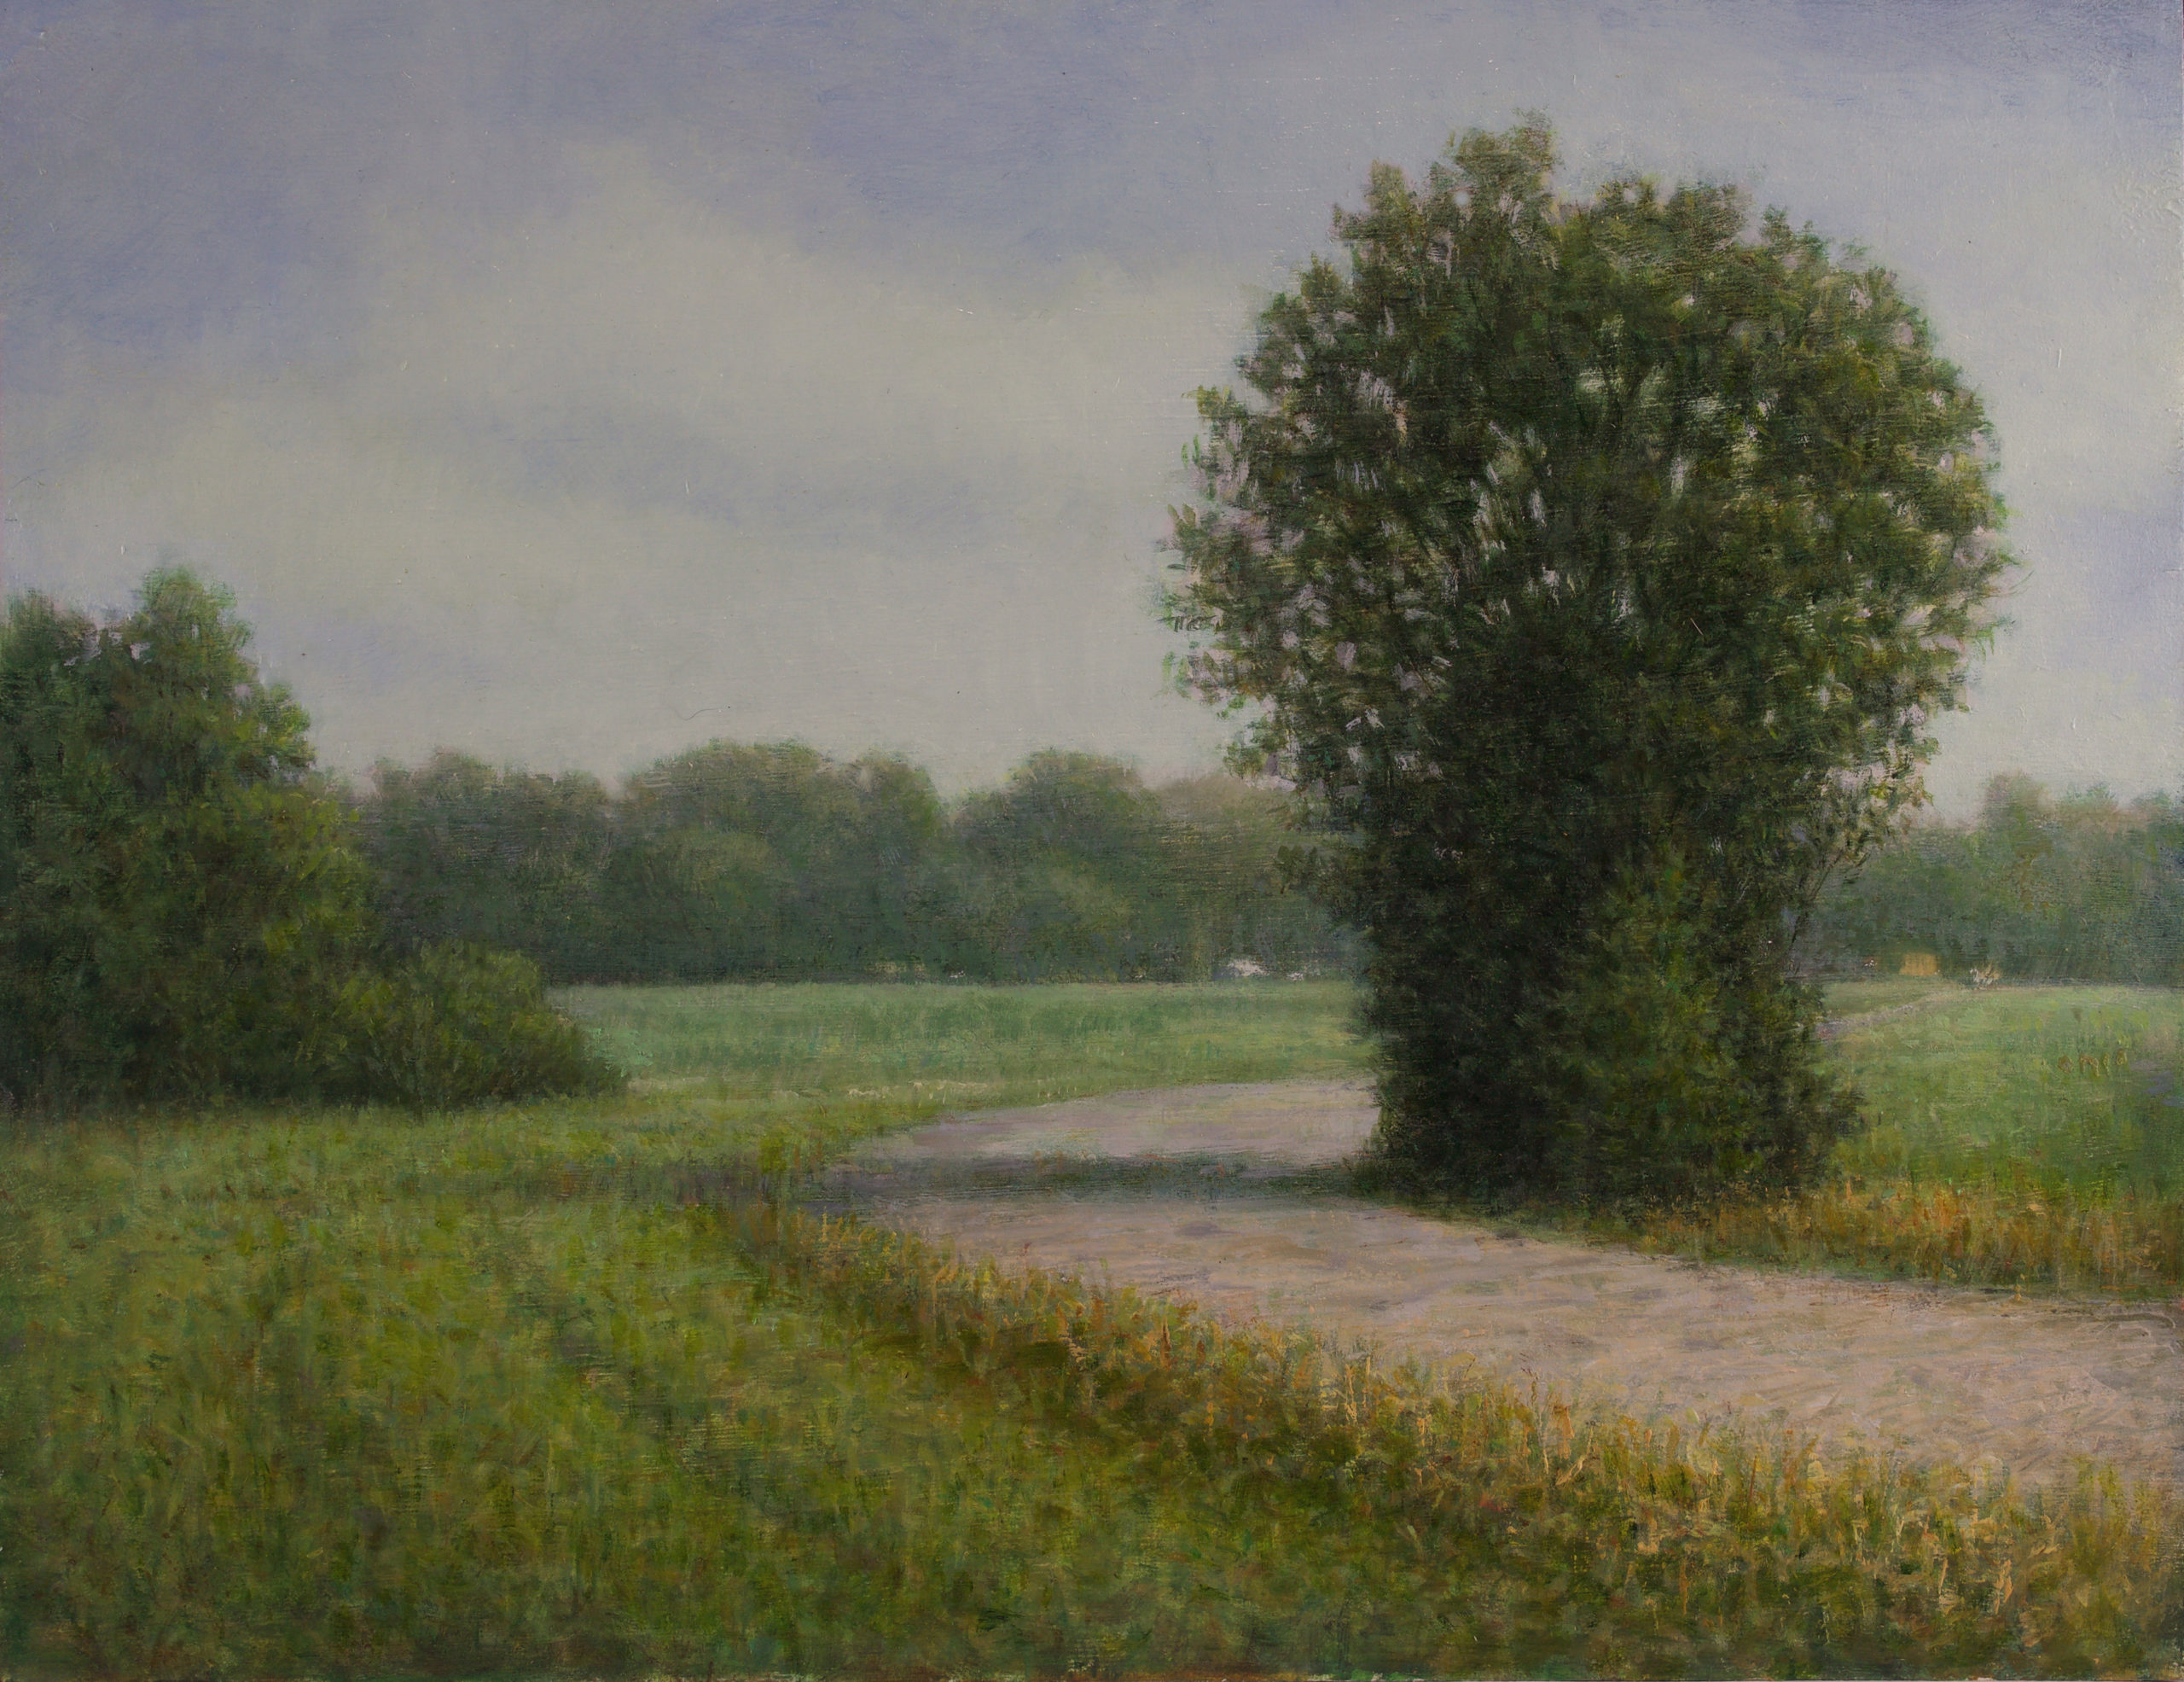 Leaving Virginia by Gerry O’Neill, oil on canvas, 11 x 14 at Craven Allen Gallery